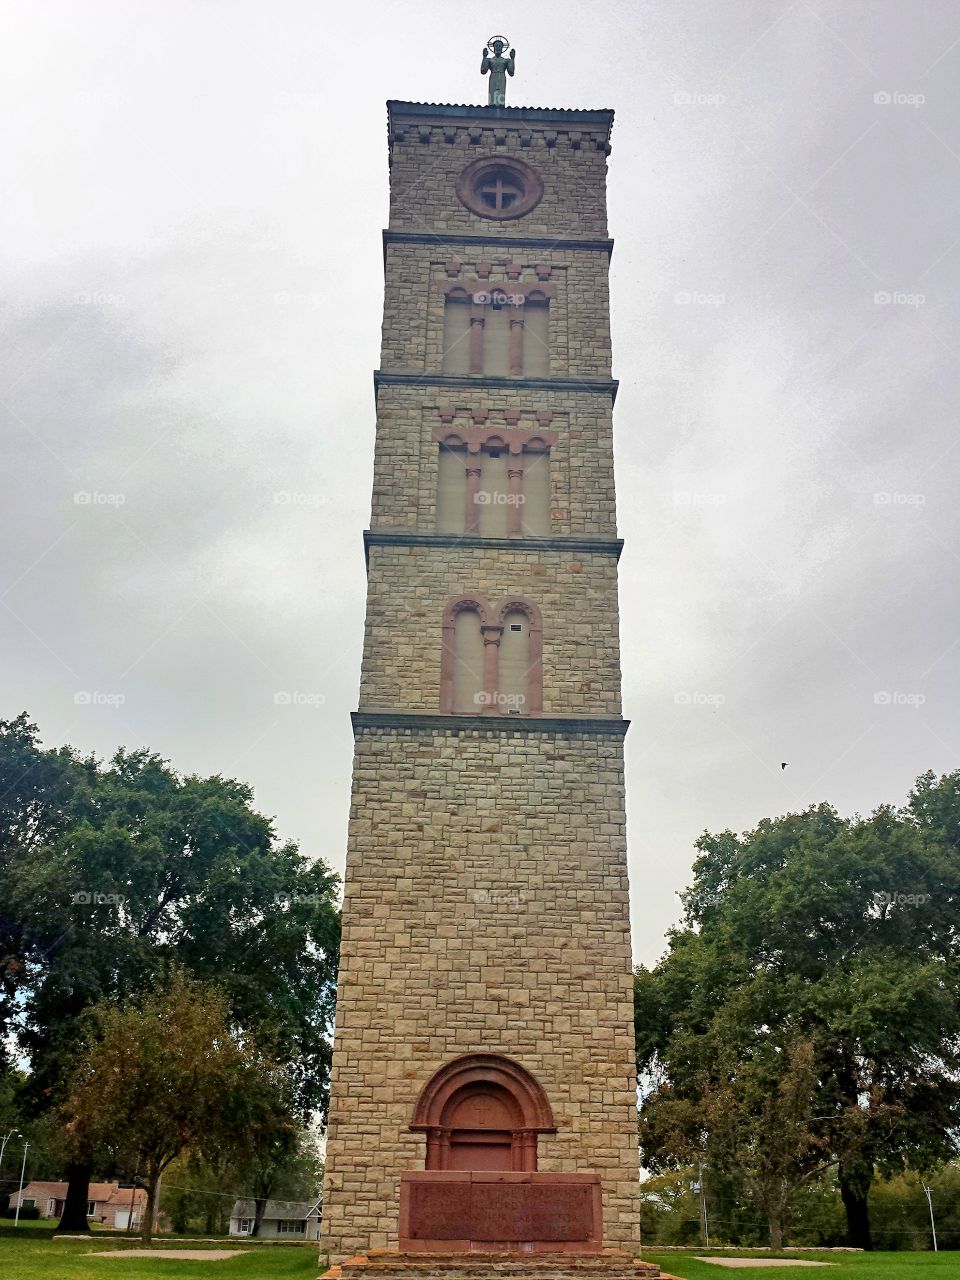 Ascension Tower